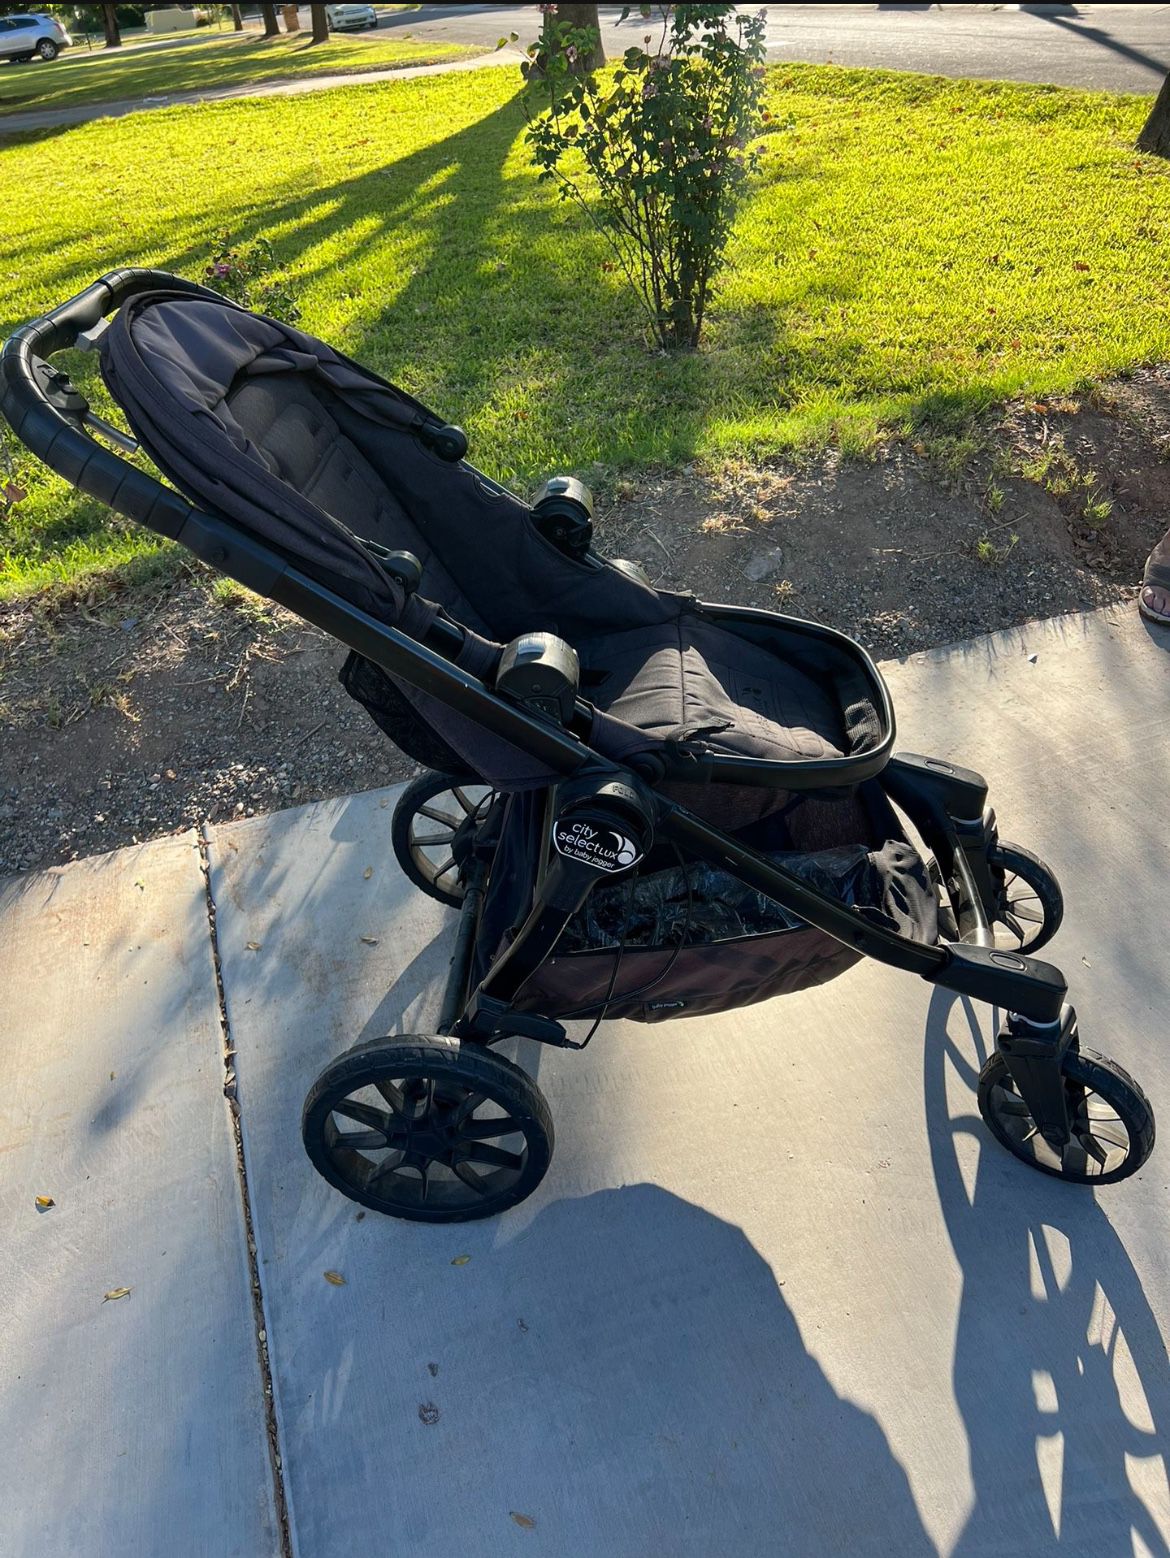 City Select Lux Stroller